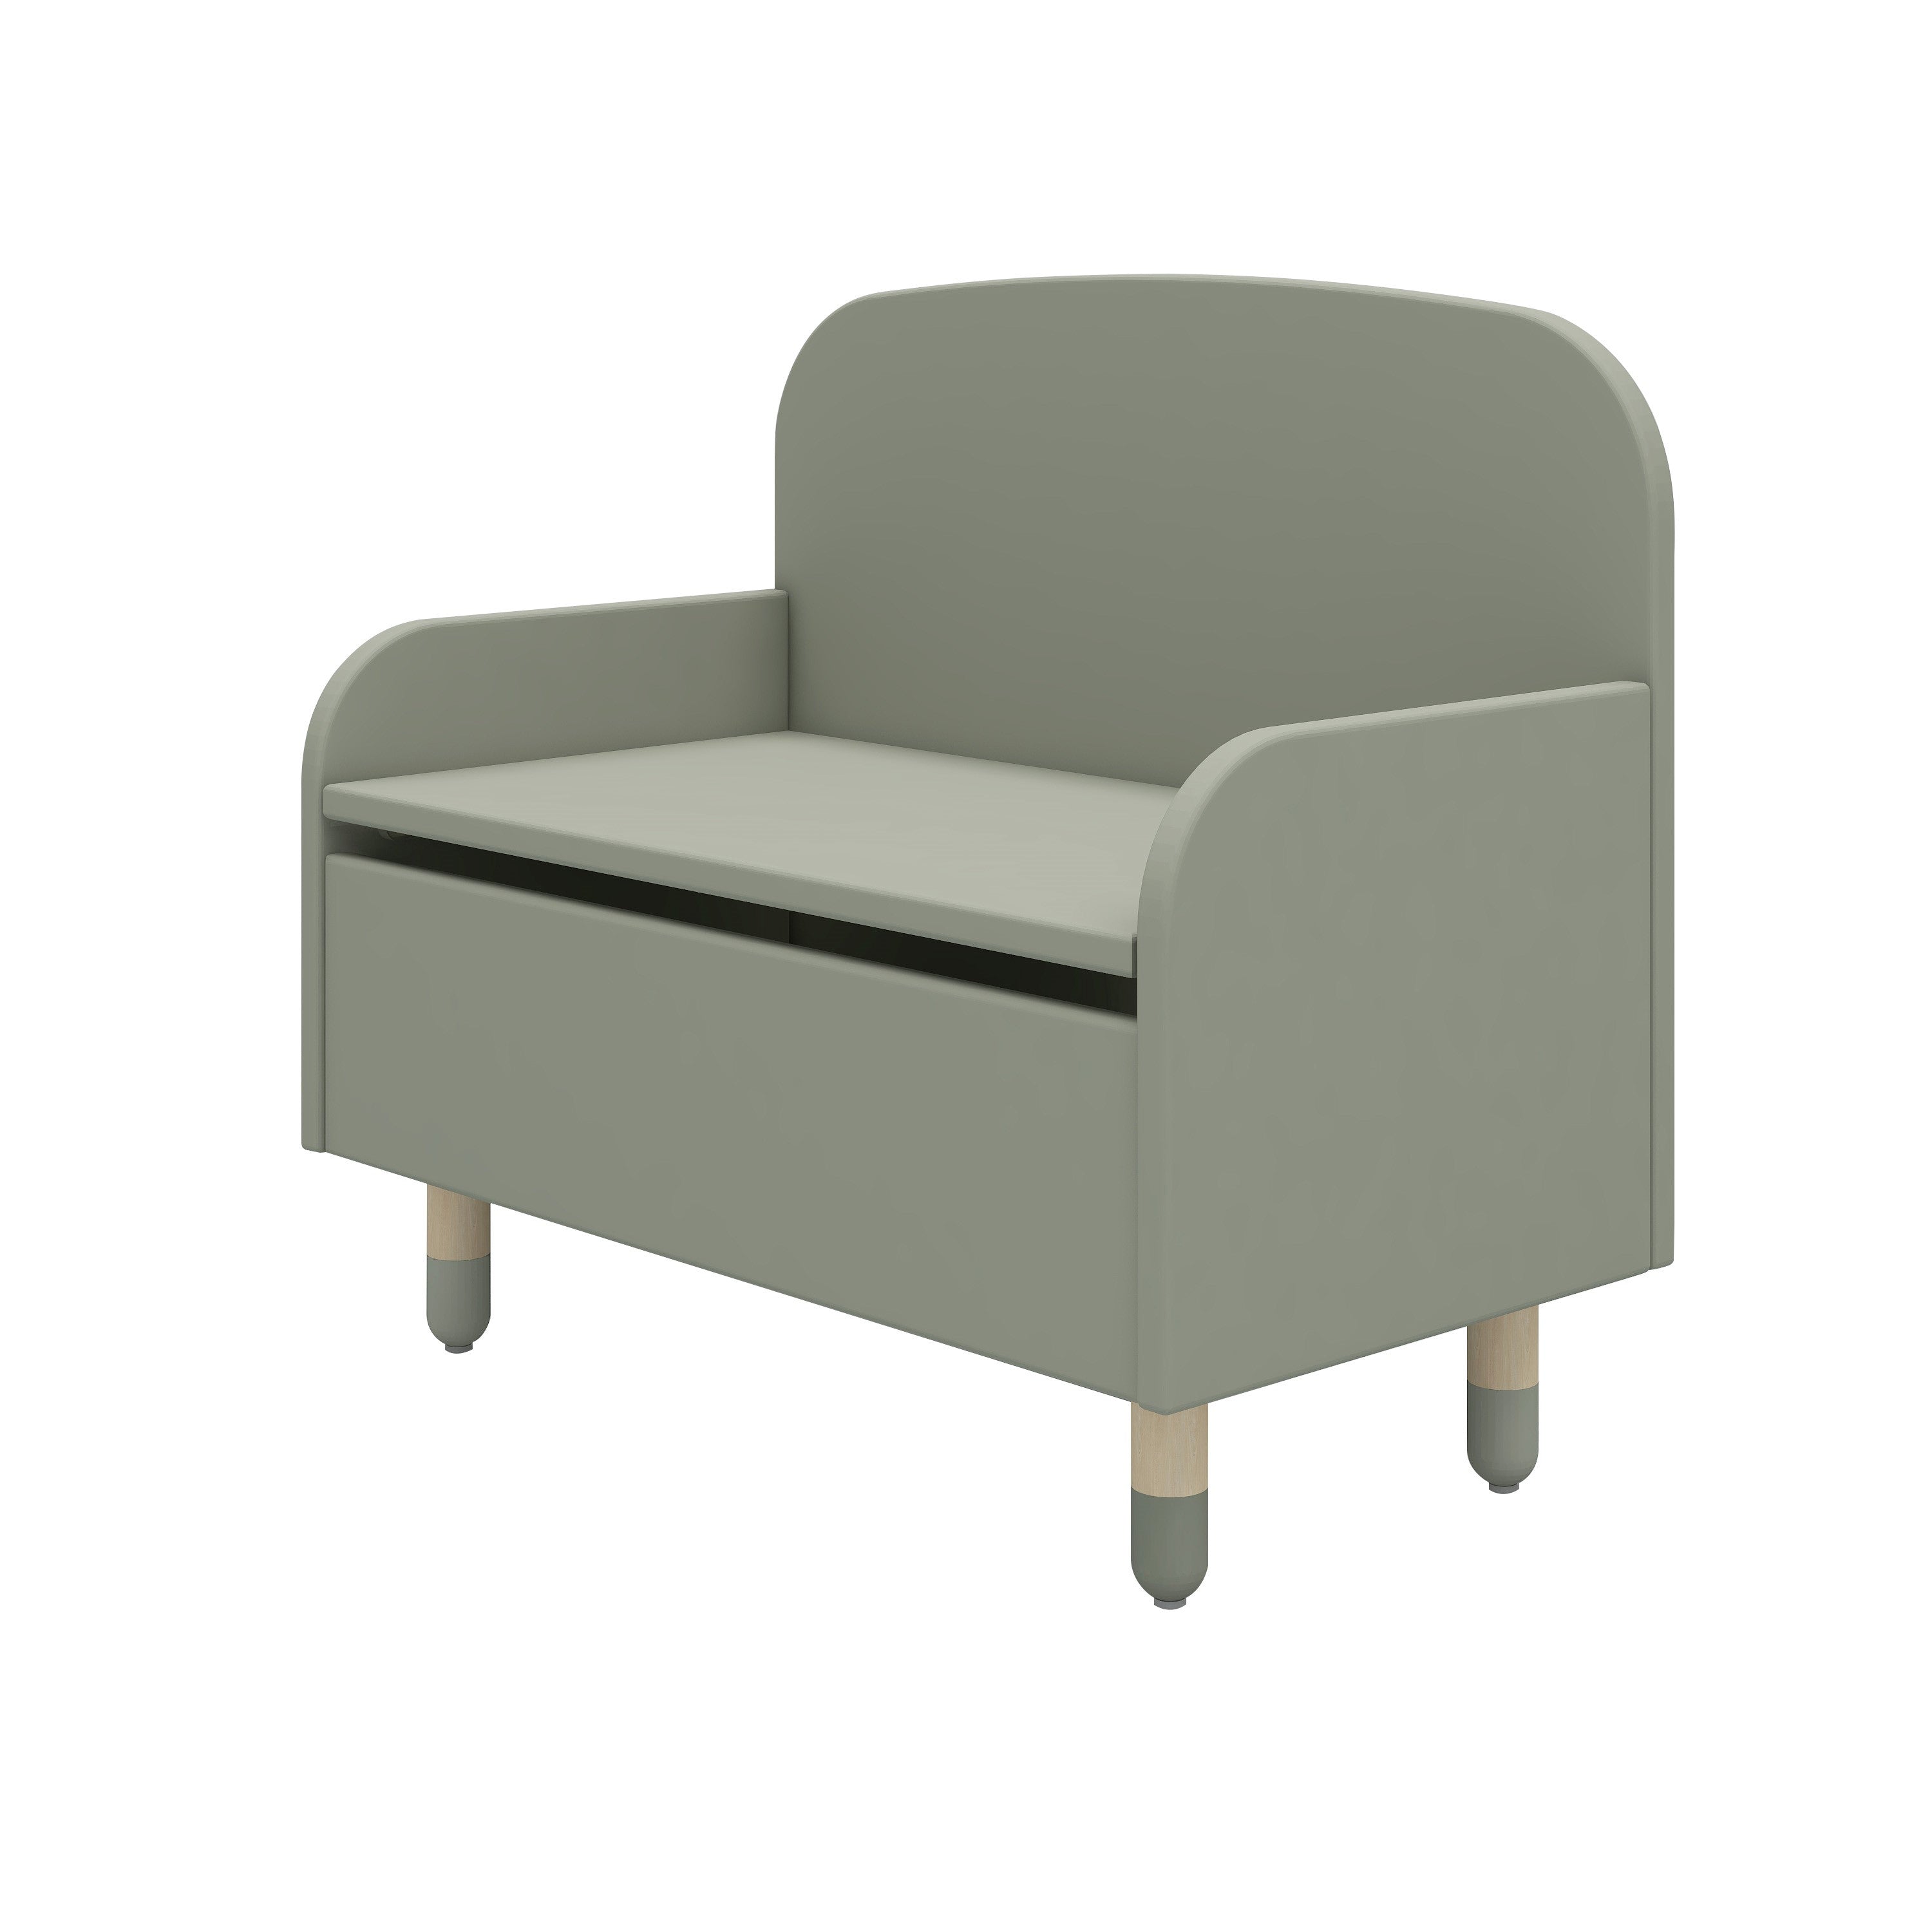 Flexa Dots Storage bench with back rest - Natural Green